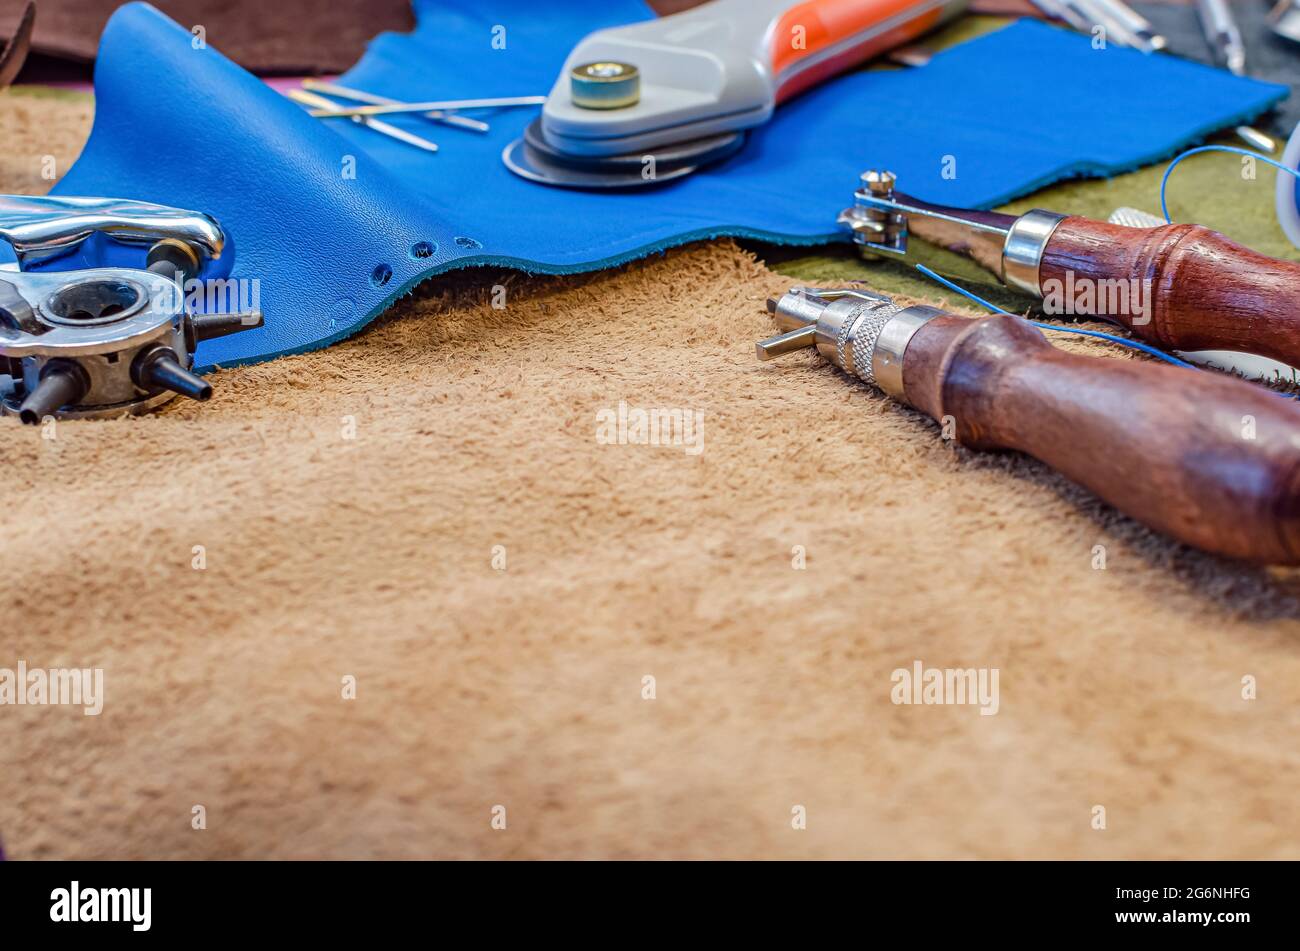 Tools for leather working Stock Photo by ©norgallery 163762910